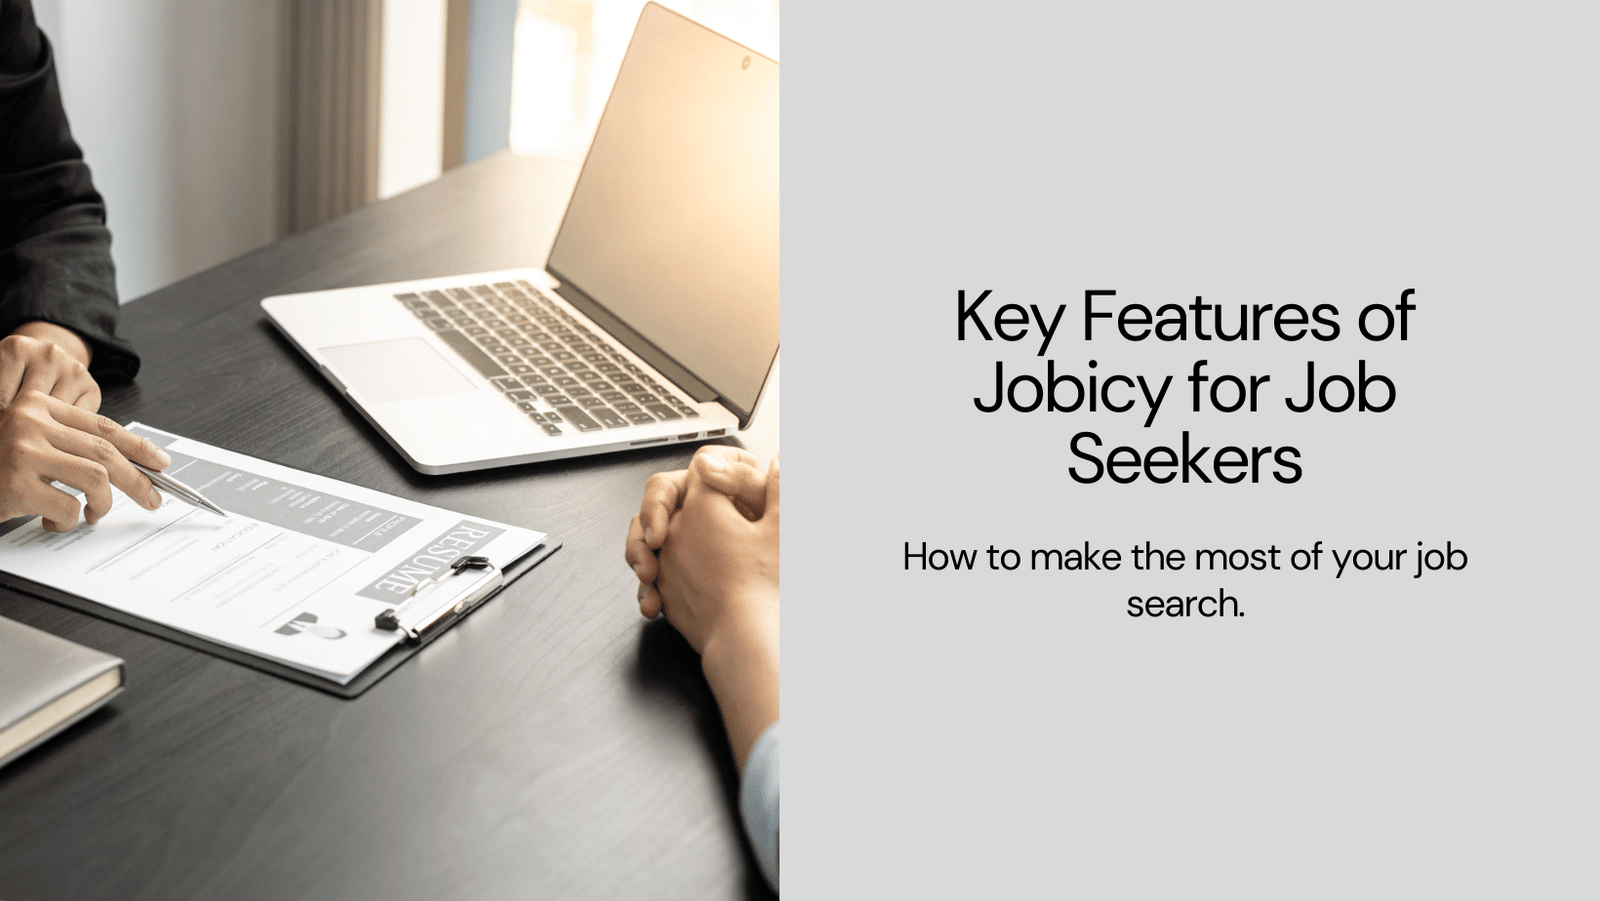 Key Features of Jobicy for Job Seekers